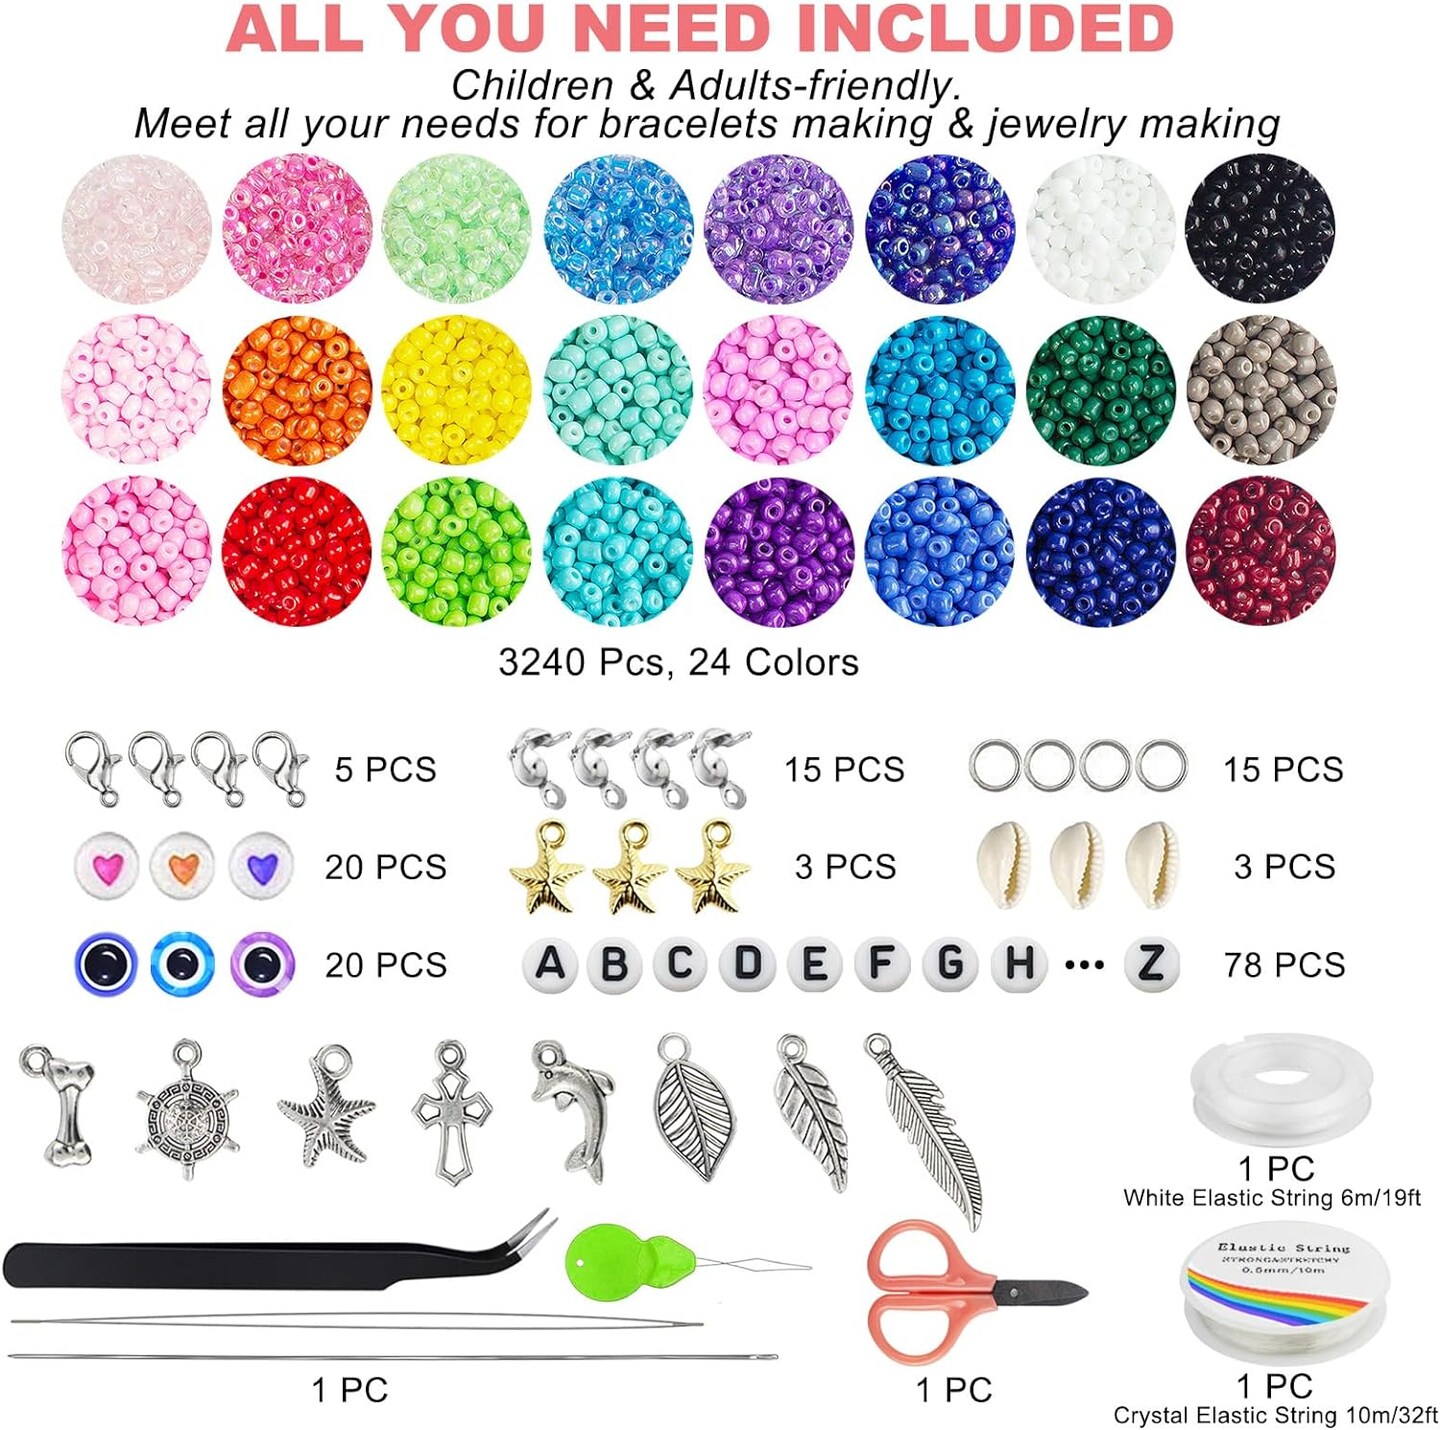 3400pcs 4mm Glass Seed Beads for Jewelry Bracelet Making Kit, Small Beads Friendship Bracelet Kit, Tiny Waist Beads Kit with Letter Beads and Elastic String, DIY Art Craft Girls Gifts.